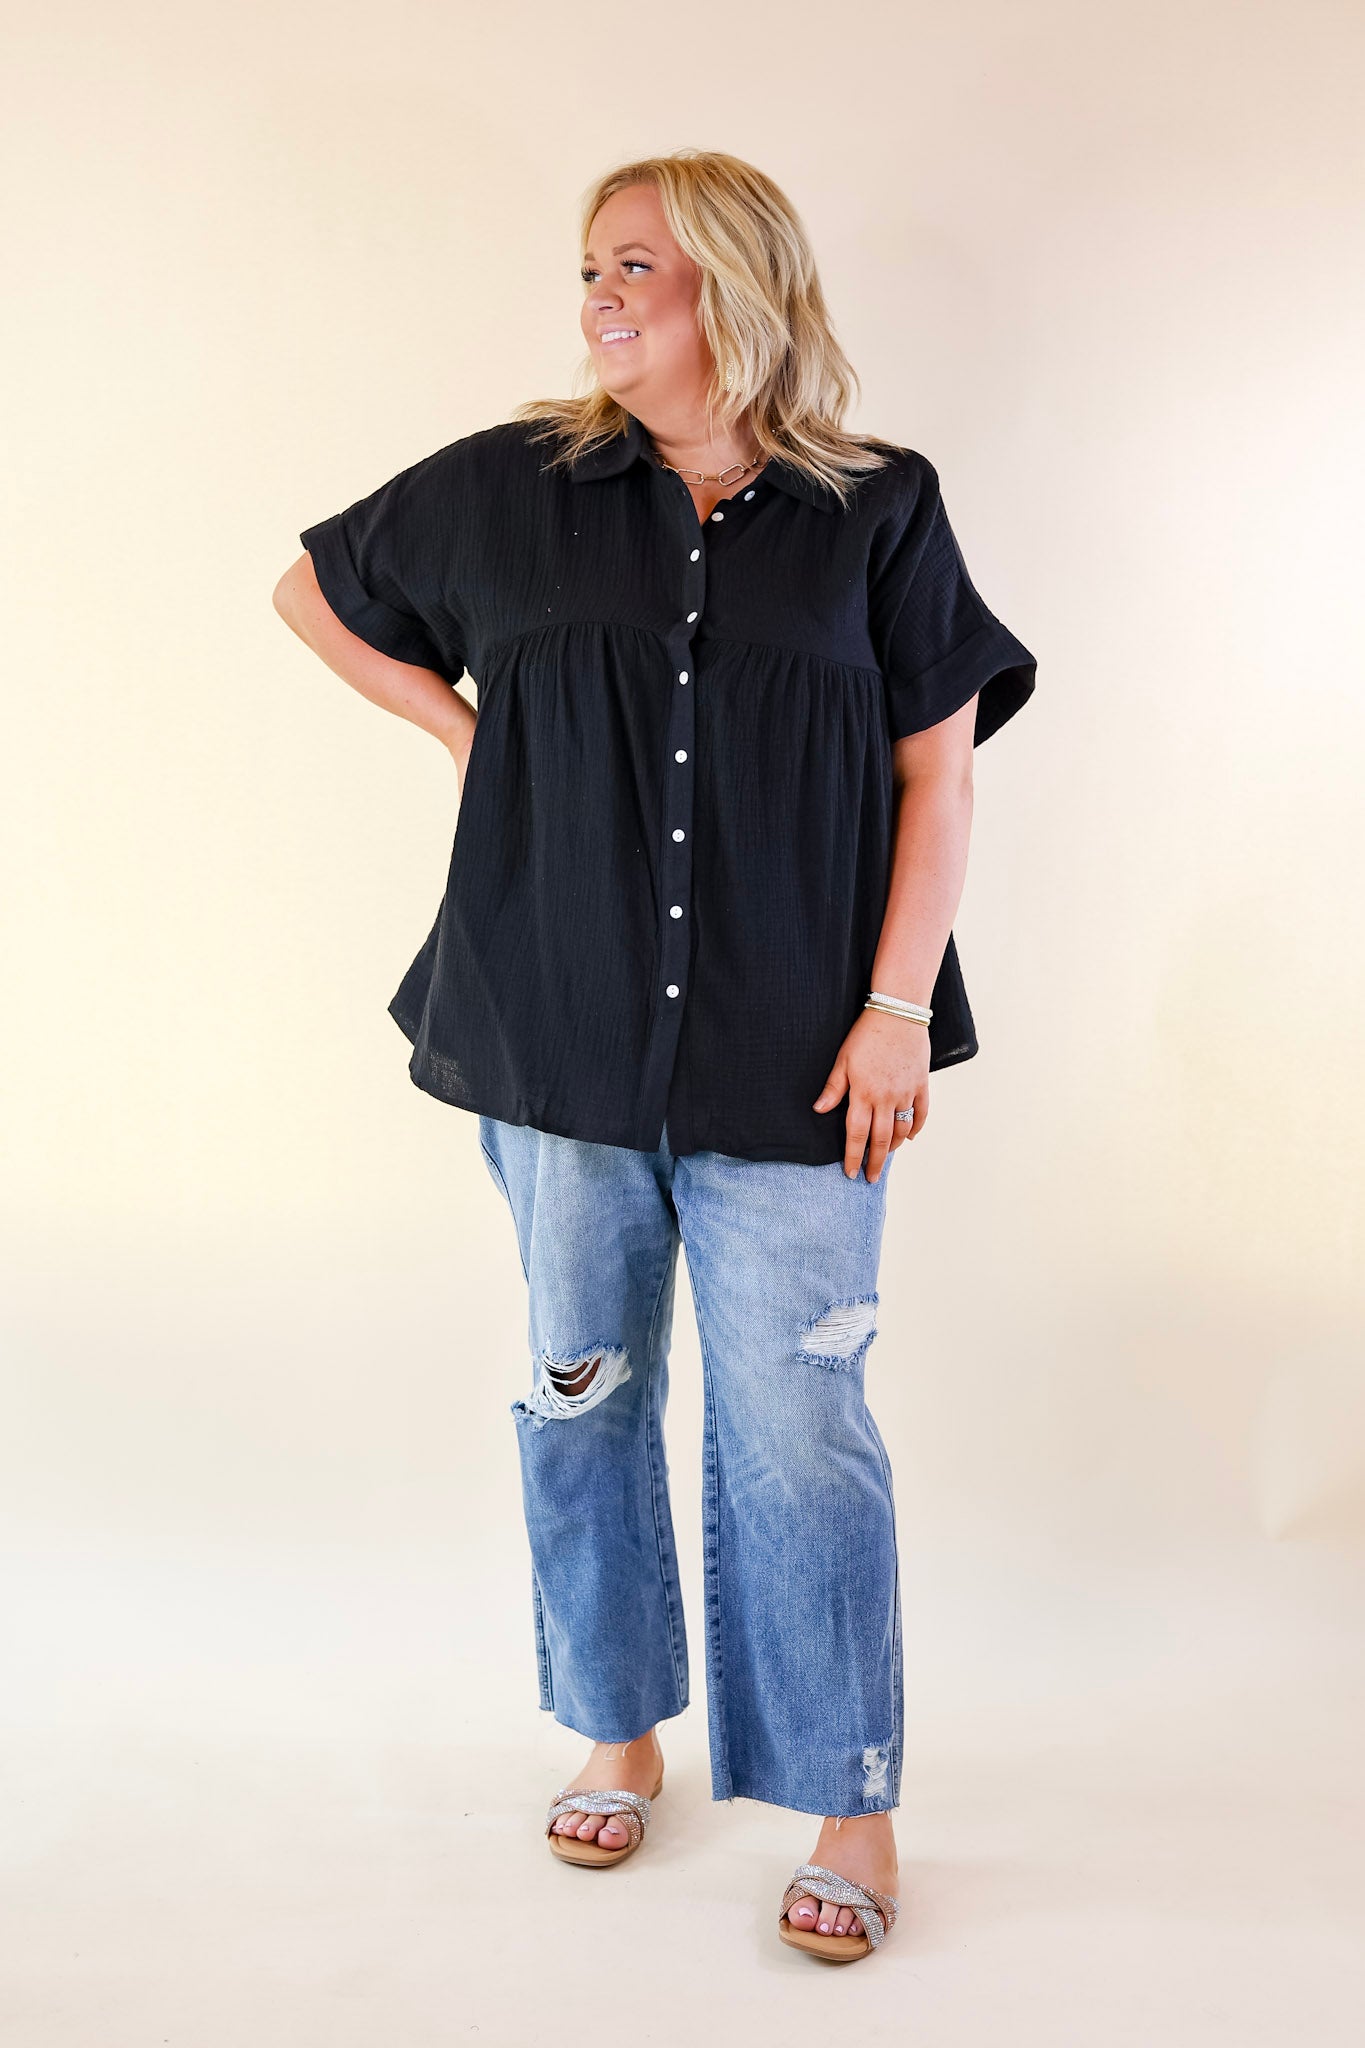 Vacation Vibes Collared Button Up Babydoll Top in Black - Giddy Up Glamour Boutique